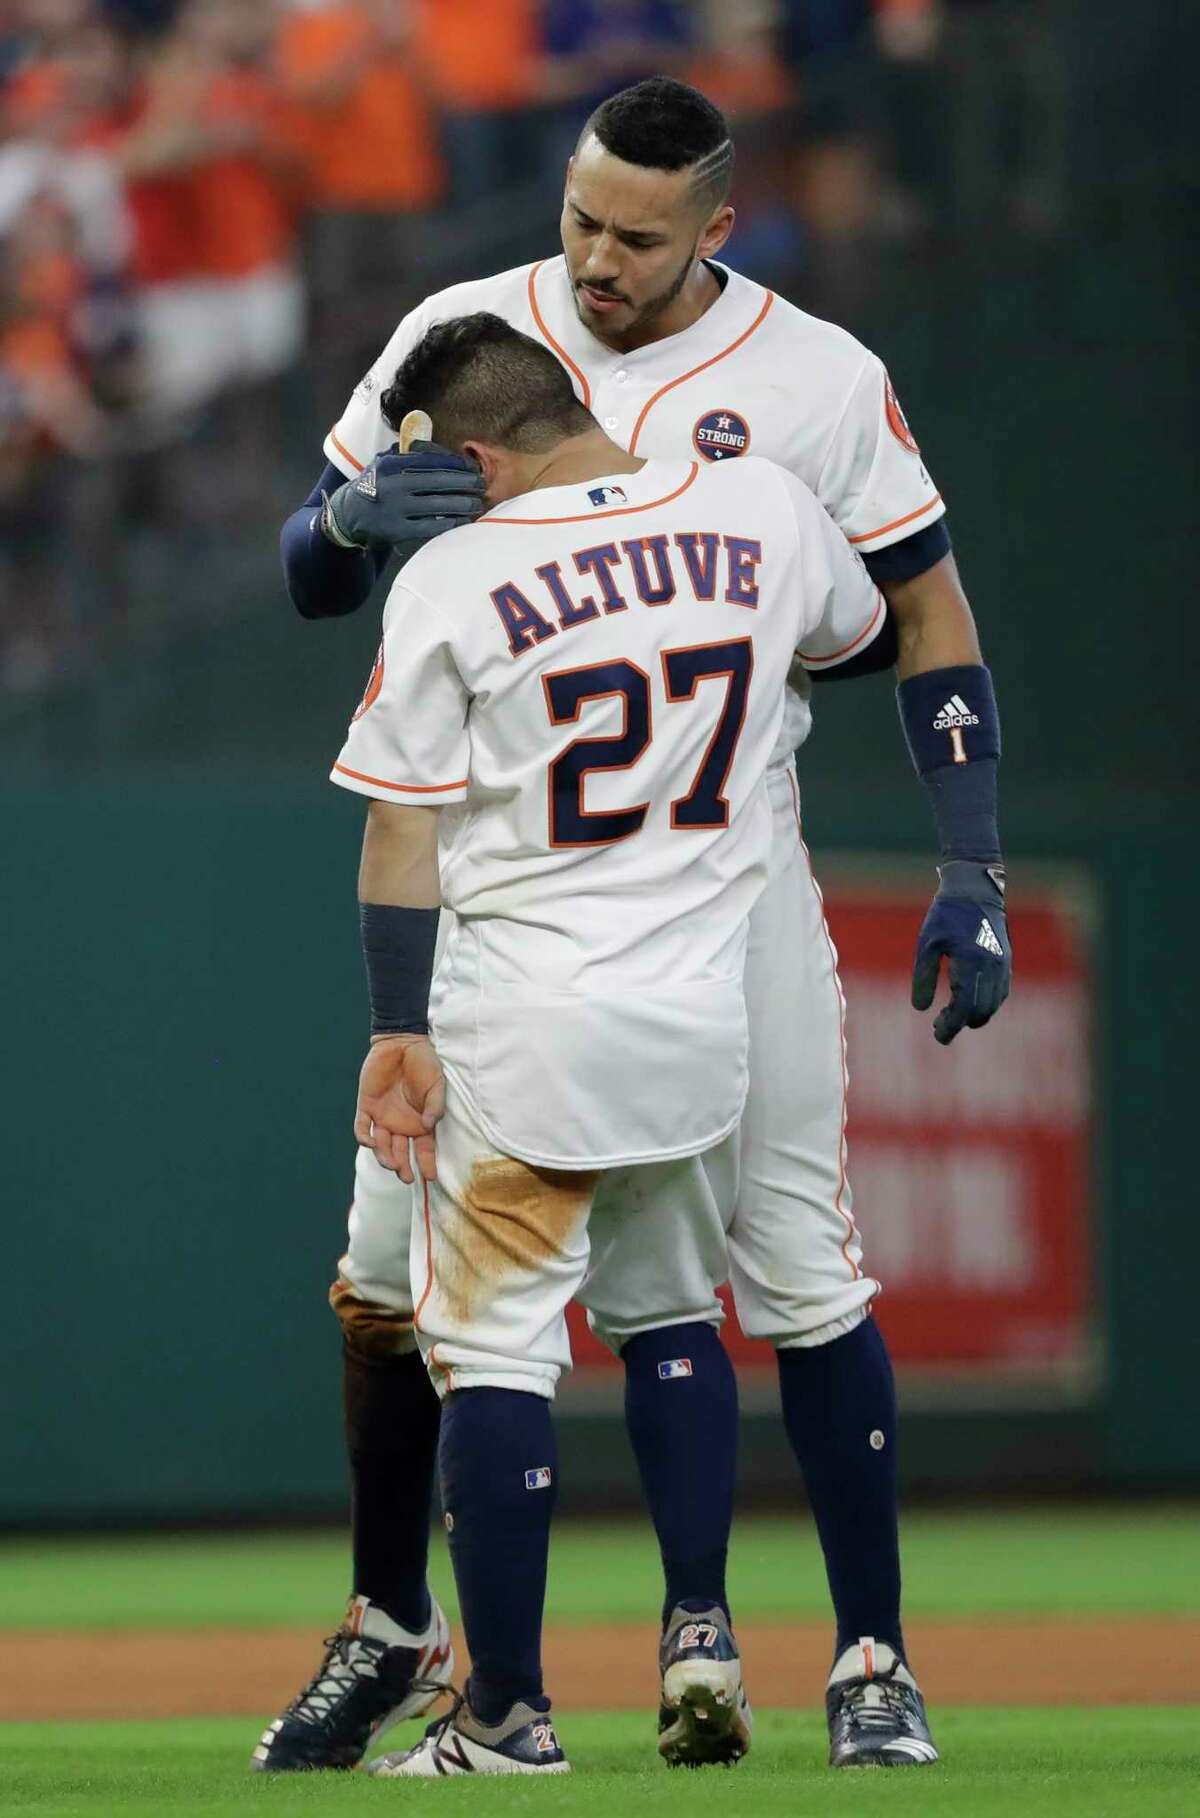 Houston Astros' Jose Altuve hugs Carlos Correa after scoring the game-winning run during the ninth inning of Game 2 of baseball's American League Championship Series against the New York Yankees Saturday, Oct. 14, 2017, in Houston. The Astros won 2-1 to take a 2-0 lead in the series. (AP Photo/David J. Phillip)